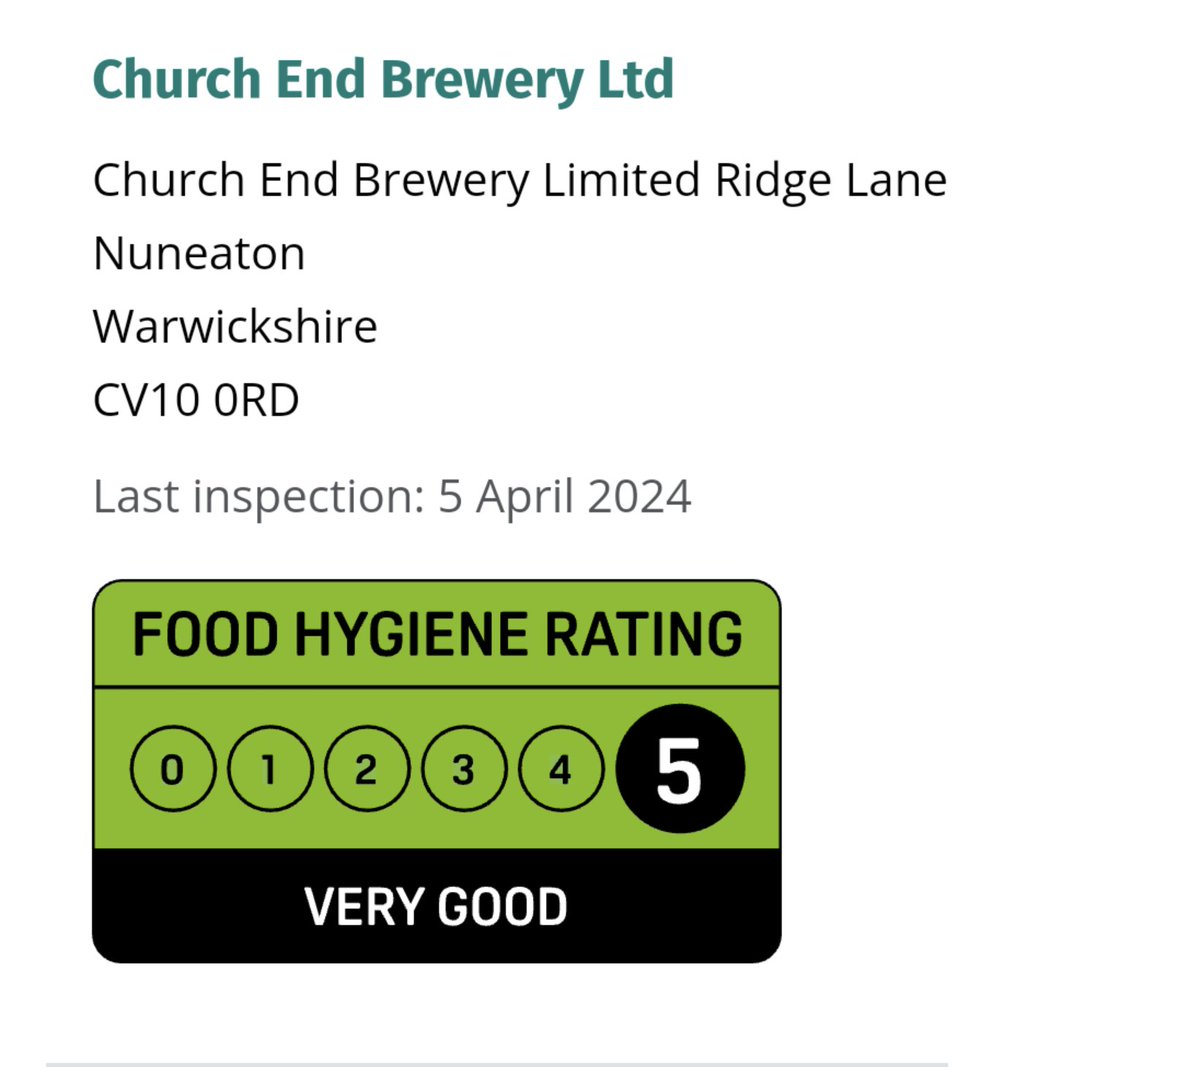 5 stars for The Brewery Tap ⭐⭐⭐⭐⭐

We are extremely happy to announce once again that we have been awarded 5 Star Rating by the Environmental Health Department of North Warwickshire council.
Thank you to our hard working team 👏🏼
#foodhygiene #brewerytap #churchendbrewery